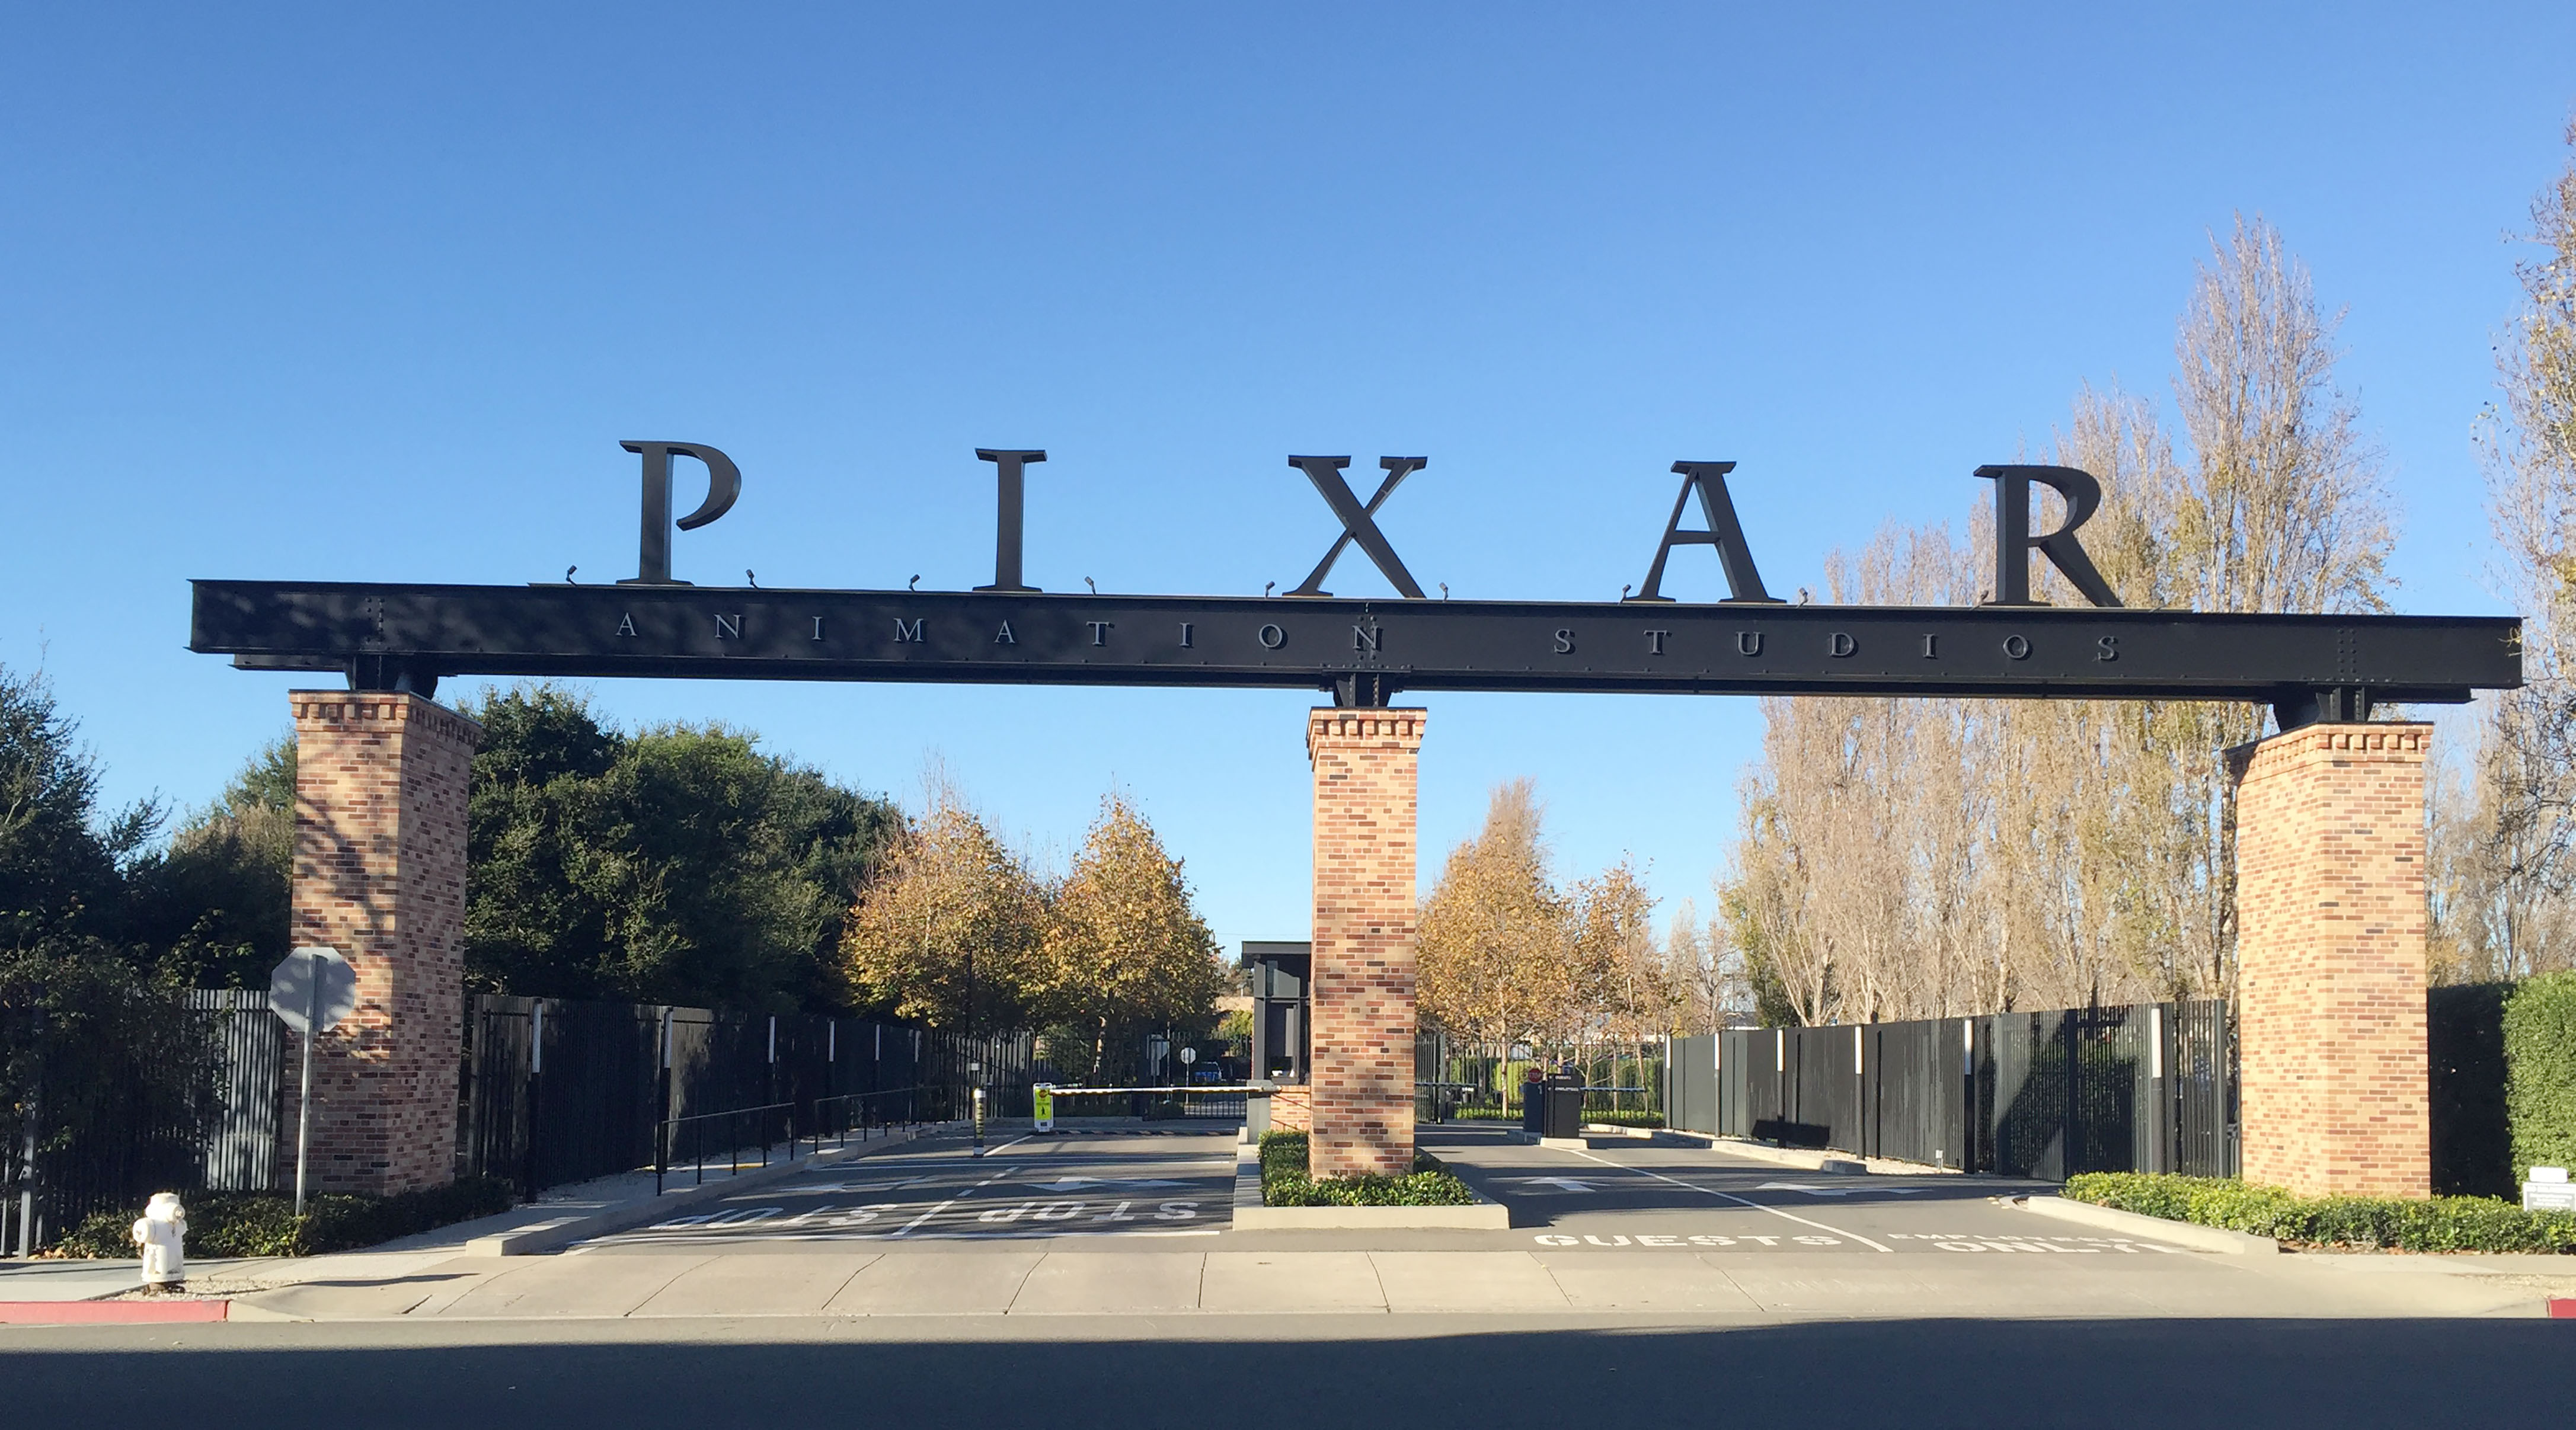 The gates to Pixar's campus is seen in Emeryville, California, on November 29, 2016. Over 21 years of unparalleled success, the executives at animation studio Pixar have developed an aphorism they are fond of repeating -- that their movies are never finished, just released. The motto speaks to the perfectionism that has seen the company gross almost $11 billion and win 13 Oscars since "Toy Story" blazed a trail as the world's first feature-length computer-generated animation in 1995.  / AFP PHOTO / Frankie TAGGART / TO GO WITH AFP STORY BY FRANKIE TAGGART-"Pixar celebrates 21 years with 'love letter' to Mexico"